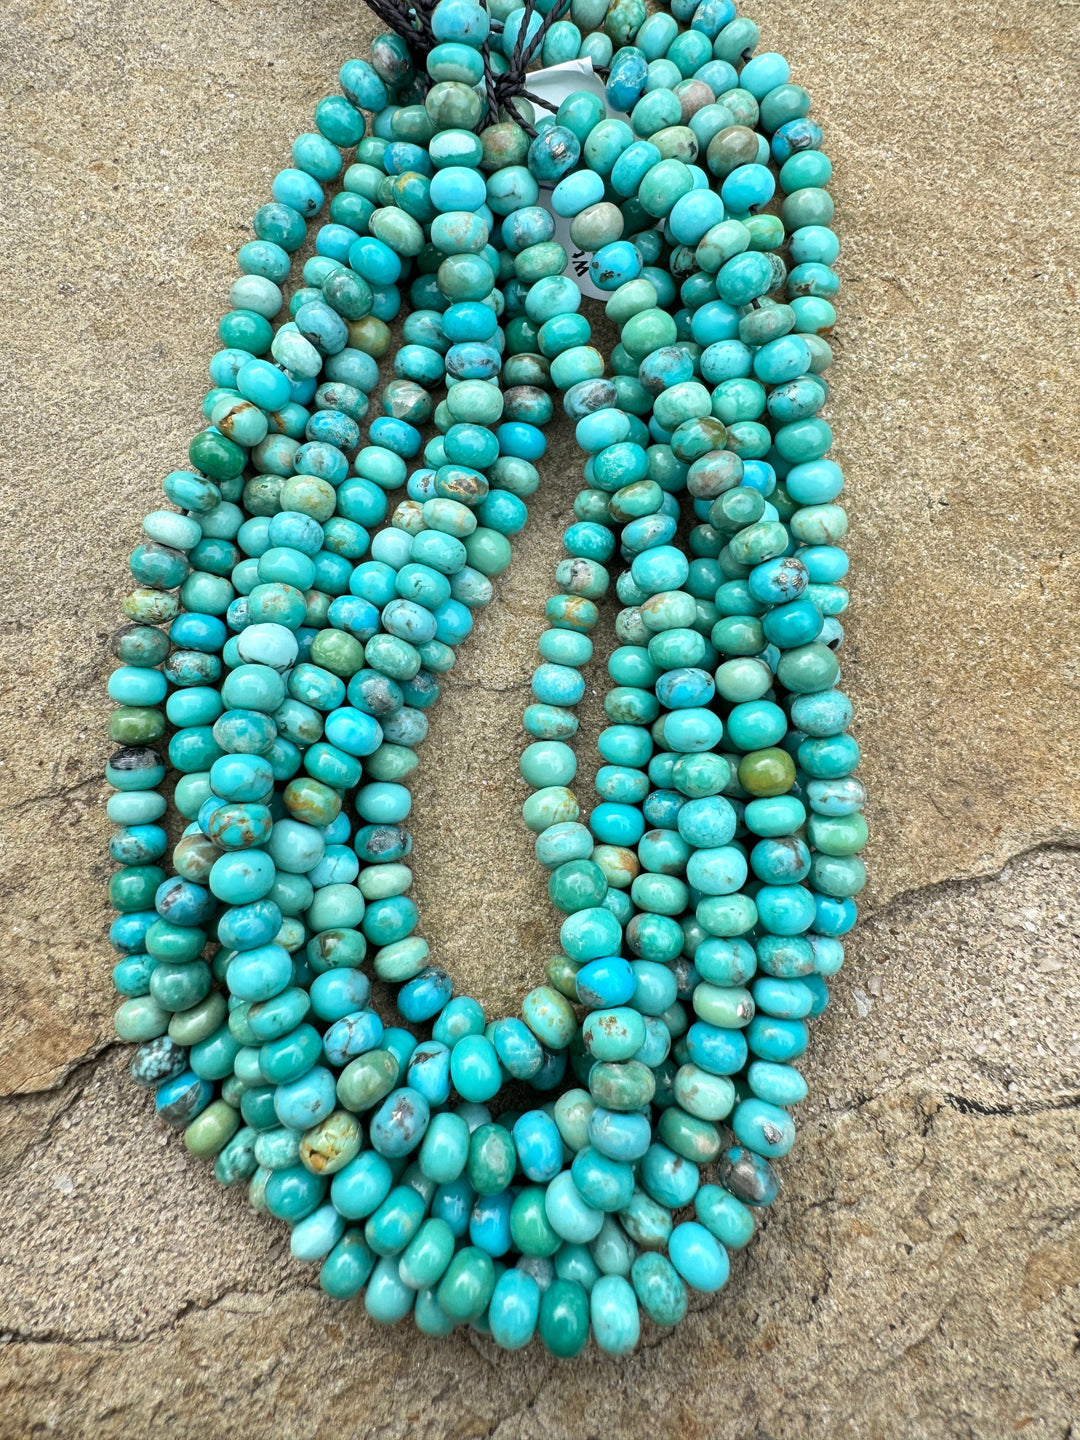 Campitos (Mex) Turquoise 5mm Rondelle Beads (9 inch